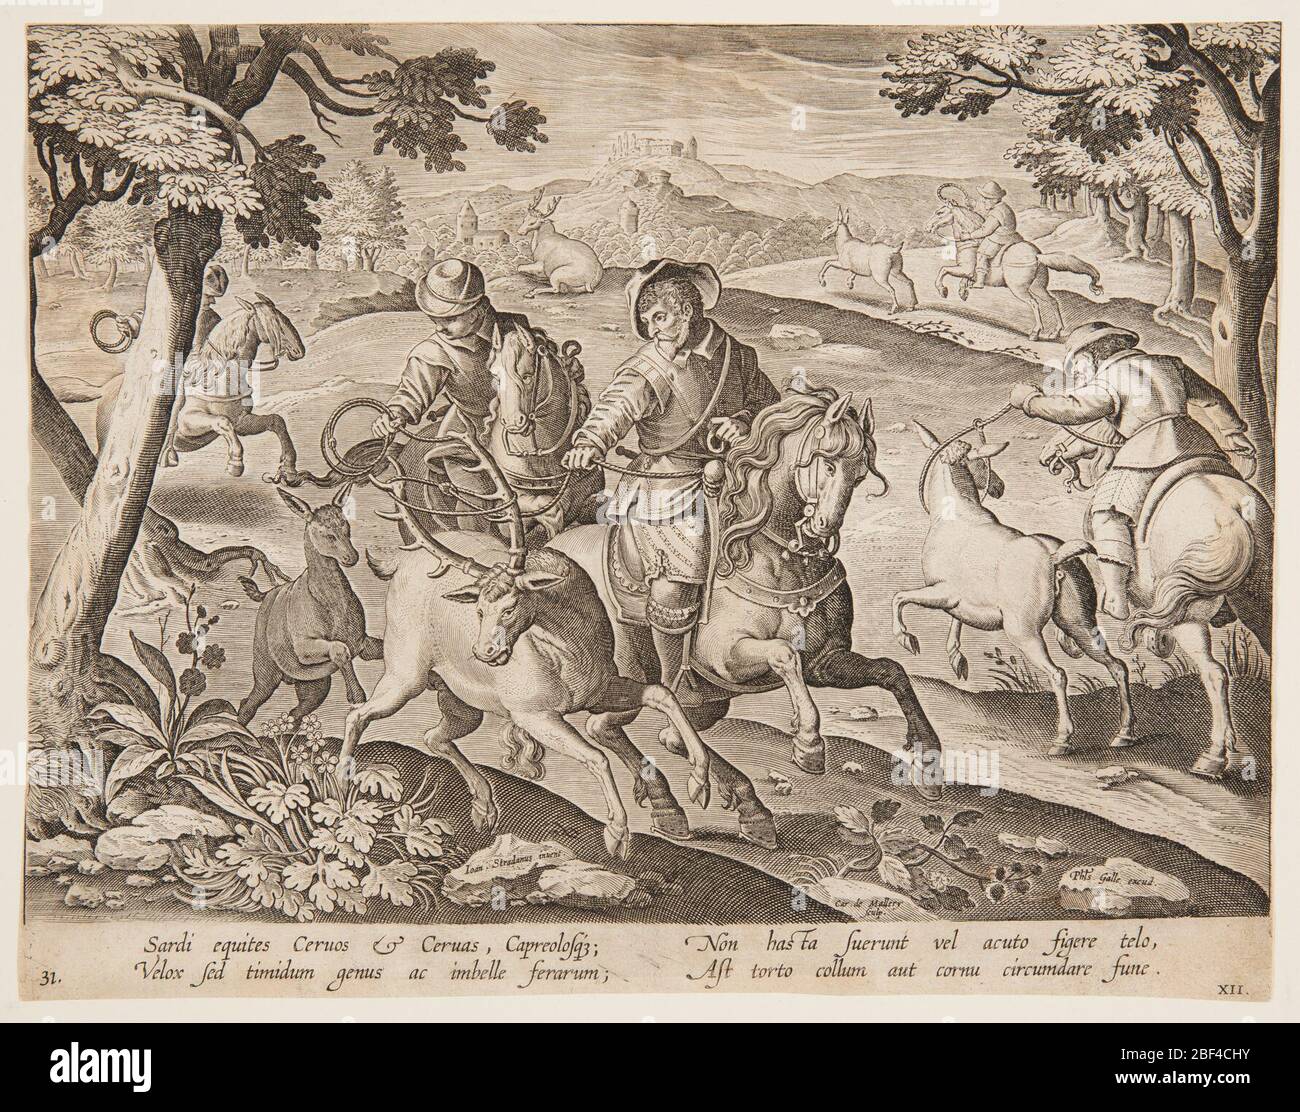 Trapping deer. Horizontal rectangle. Hunters on horseback lasso deer in foreground; on stone, near left center: 'Ioan. Stradanus invent.'; at lower right: 'Car. de Mallery Sculp. Phls Galle excud.' Stock Photo